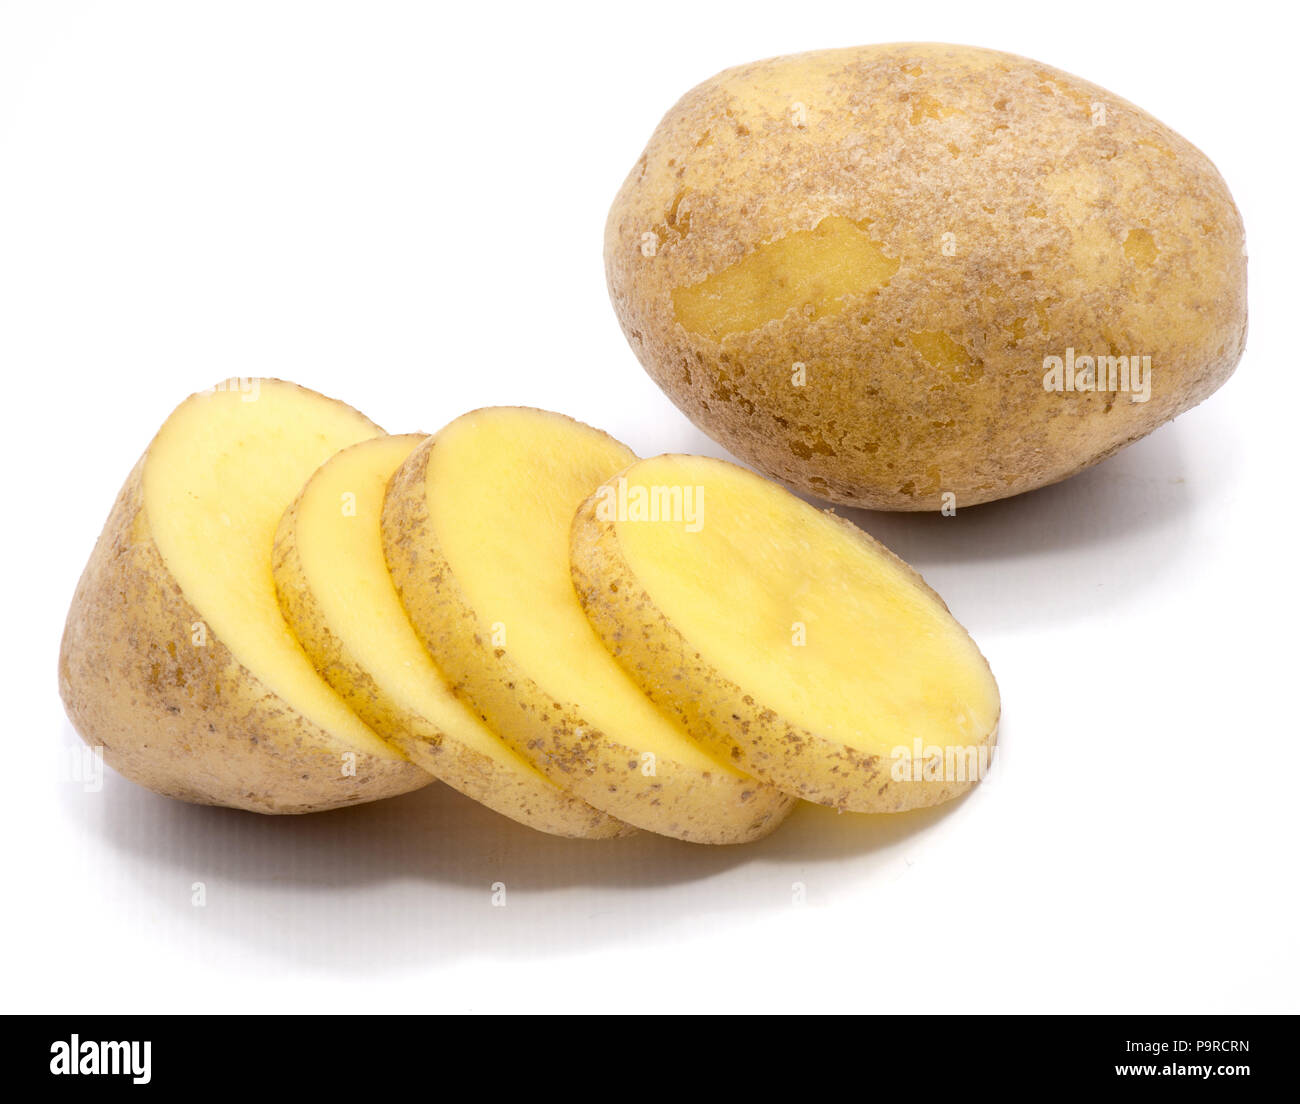 One whole, sliced potato and a half isolated on white background Stock Photo